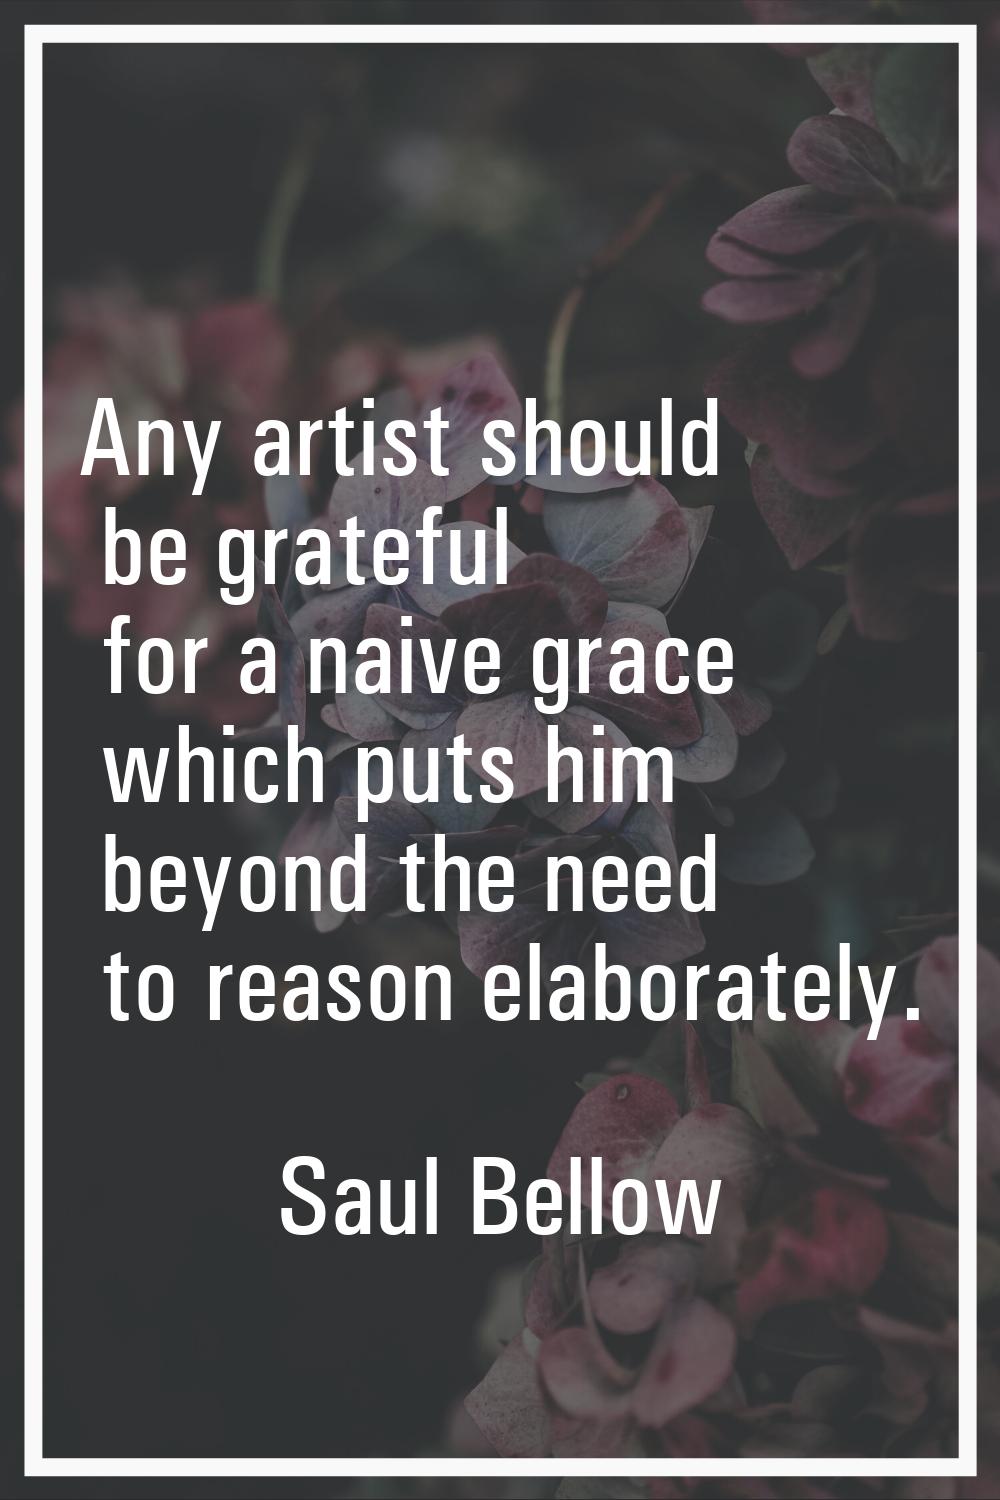 Any artist should be grateful for a naive grace which puts him beyond the need to reason elaboratel